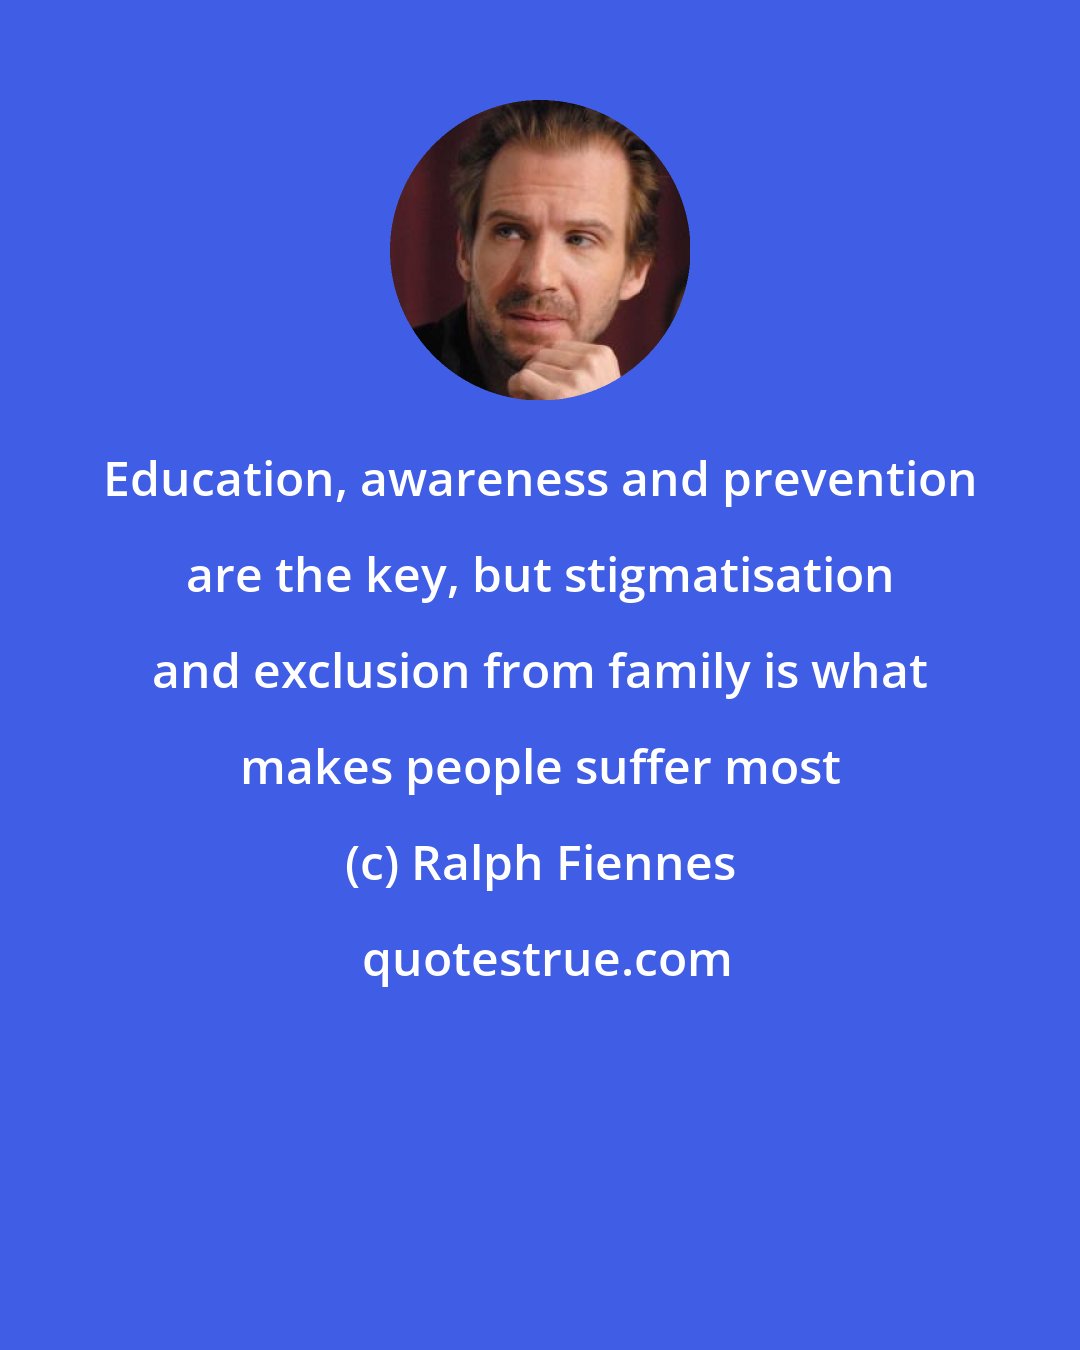 Ralph Fiennes: Education, awareness and prevention are the key, but stigmatisation and exclusion from family is what makes people suffer most